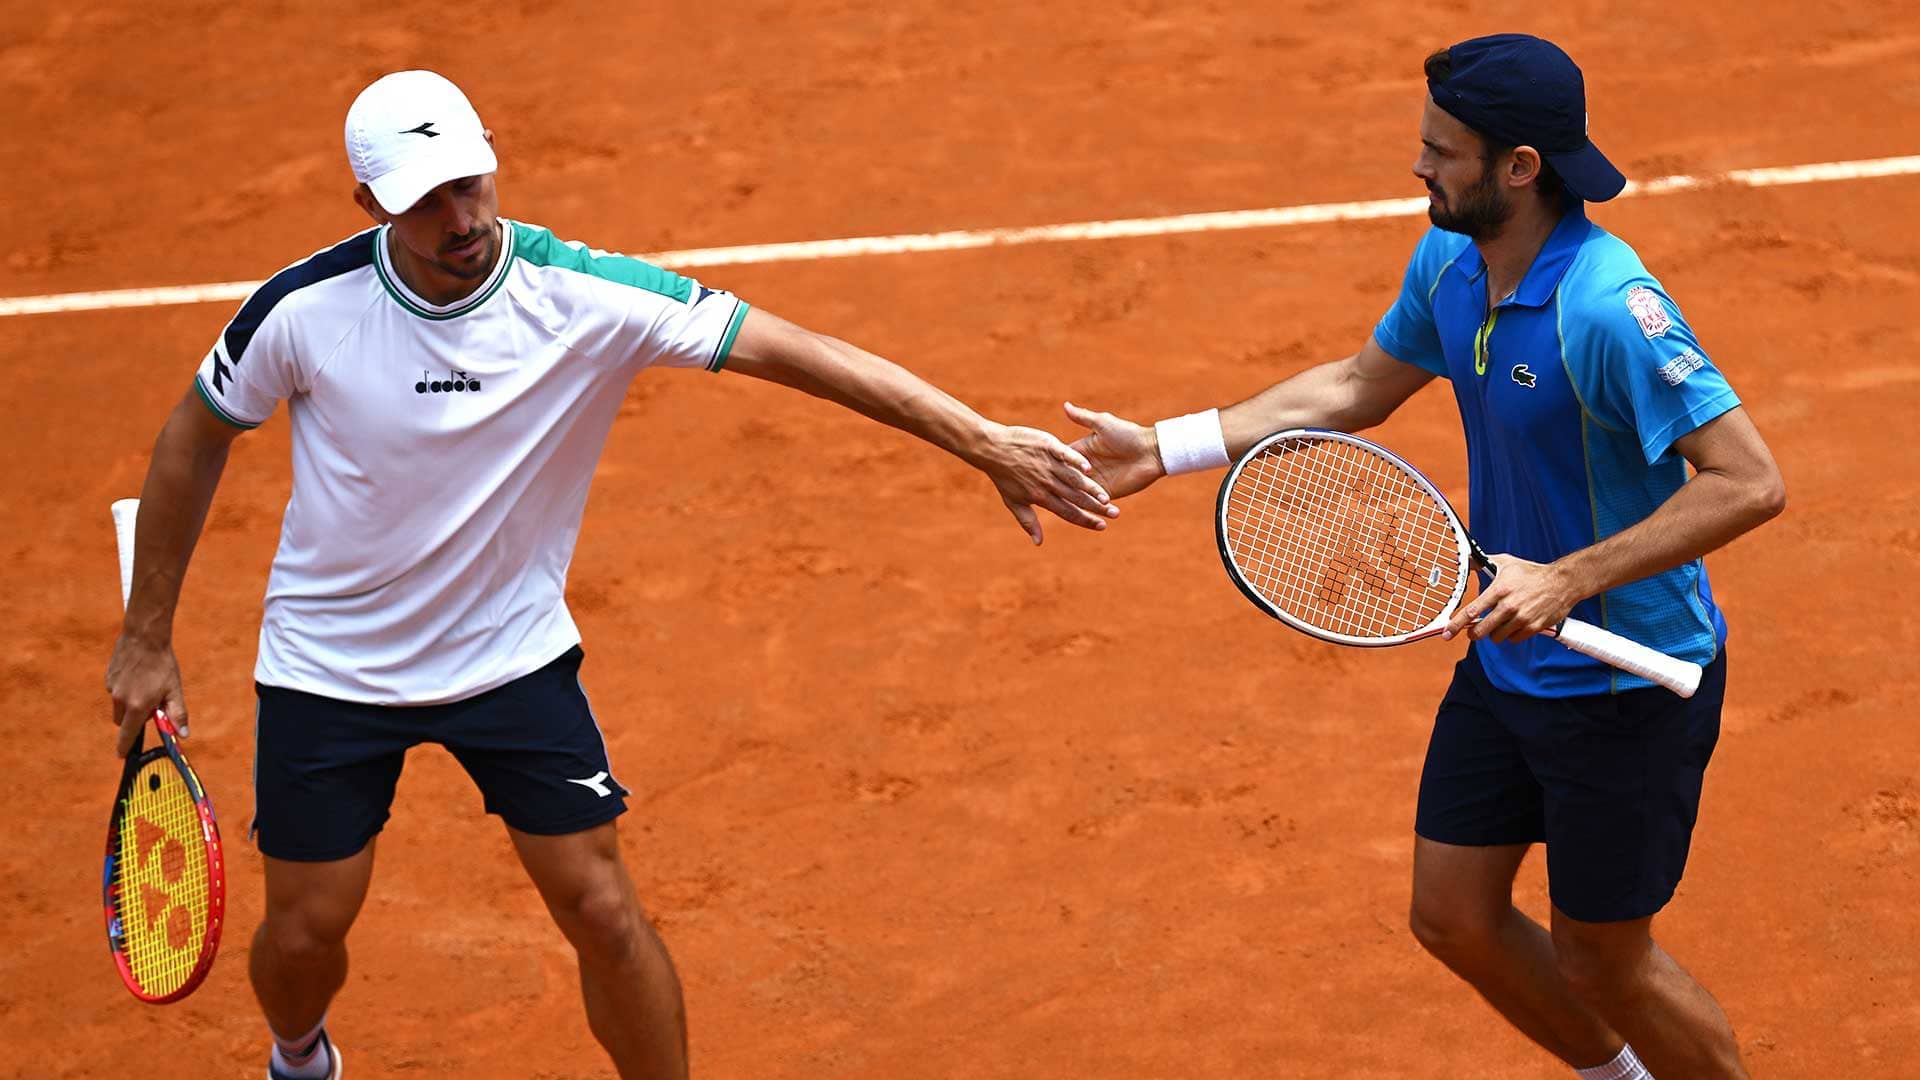 Jan Zielinski and Hugo Nys in action on Friday in Rome.